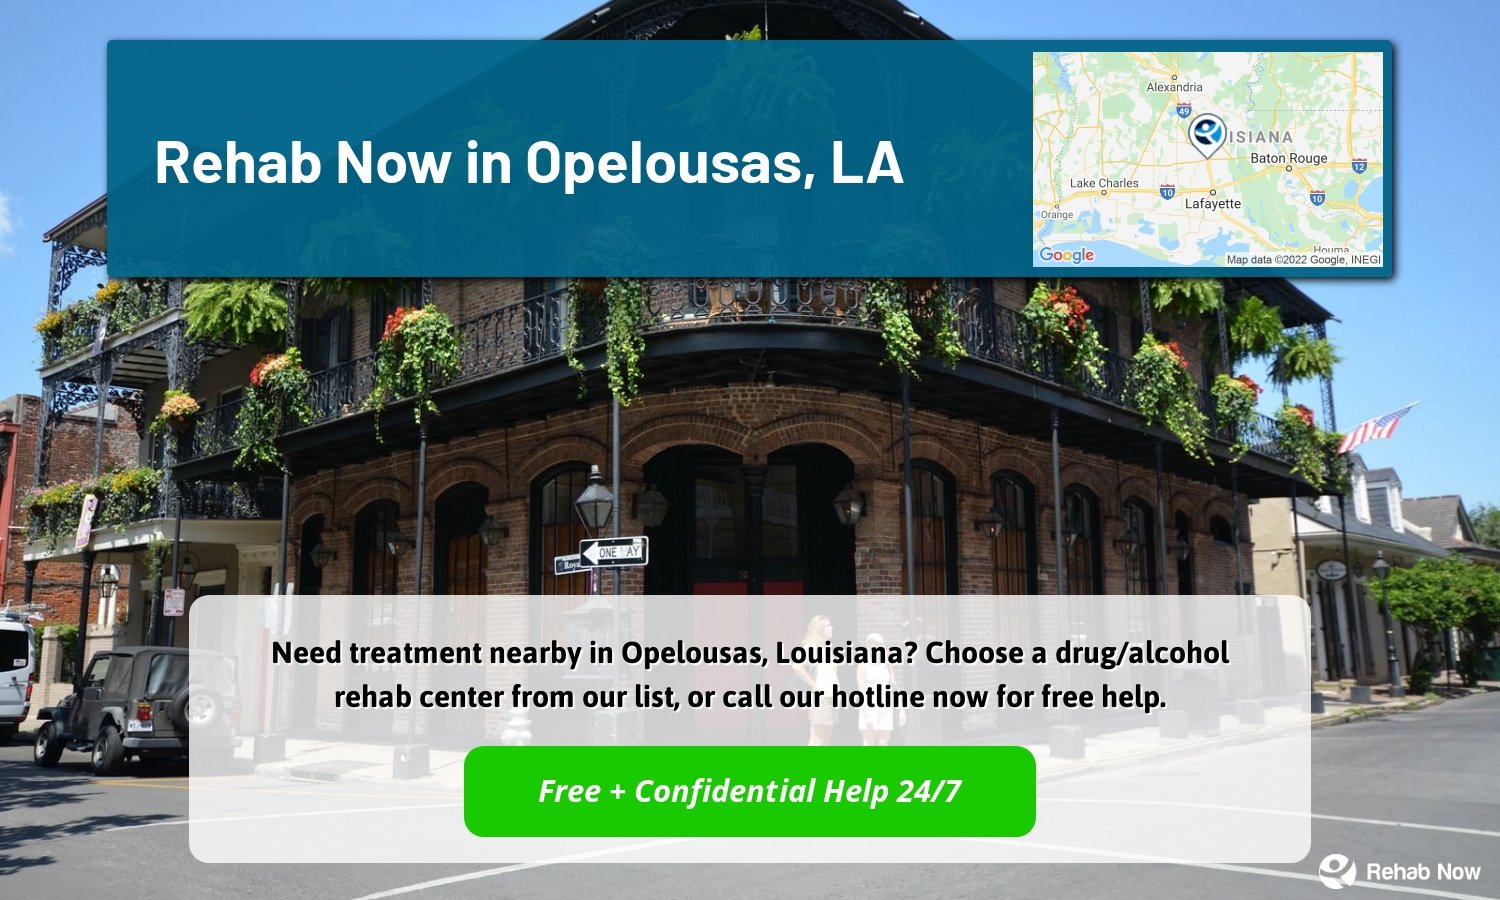 Need treatment nearby in Opelousas, Louisiana? Choose a drug/alcohol rehab center from our list, or call our hotline now for free help.